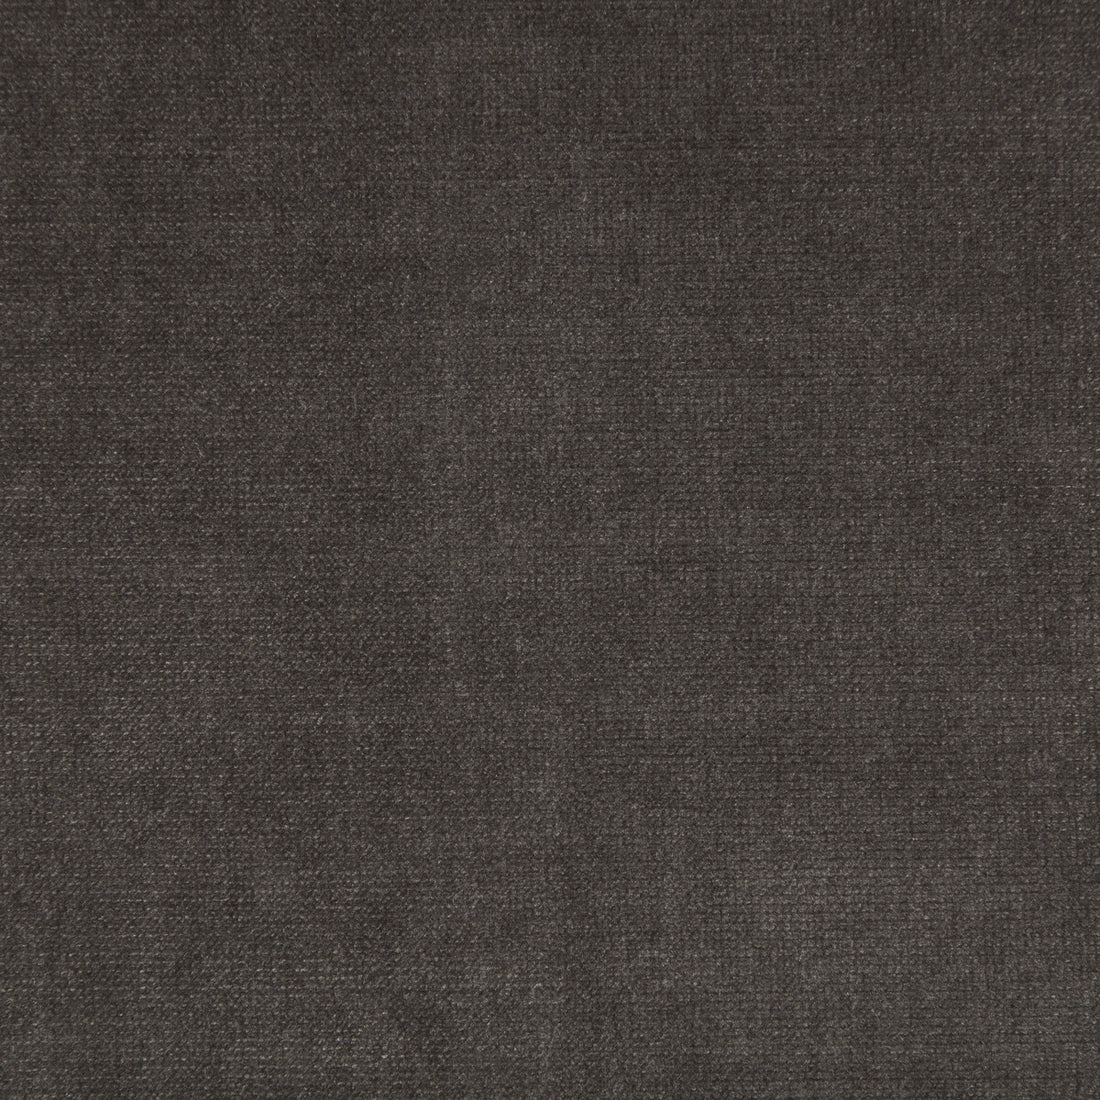 Chessford fabric in smoke color - pattern 35360.21.0 - by Kravet Smart in the Performance collection